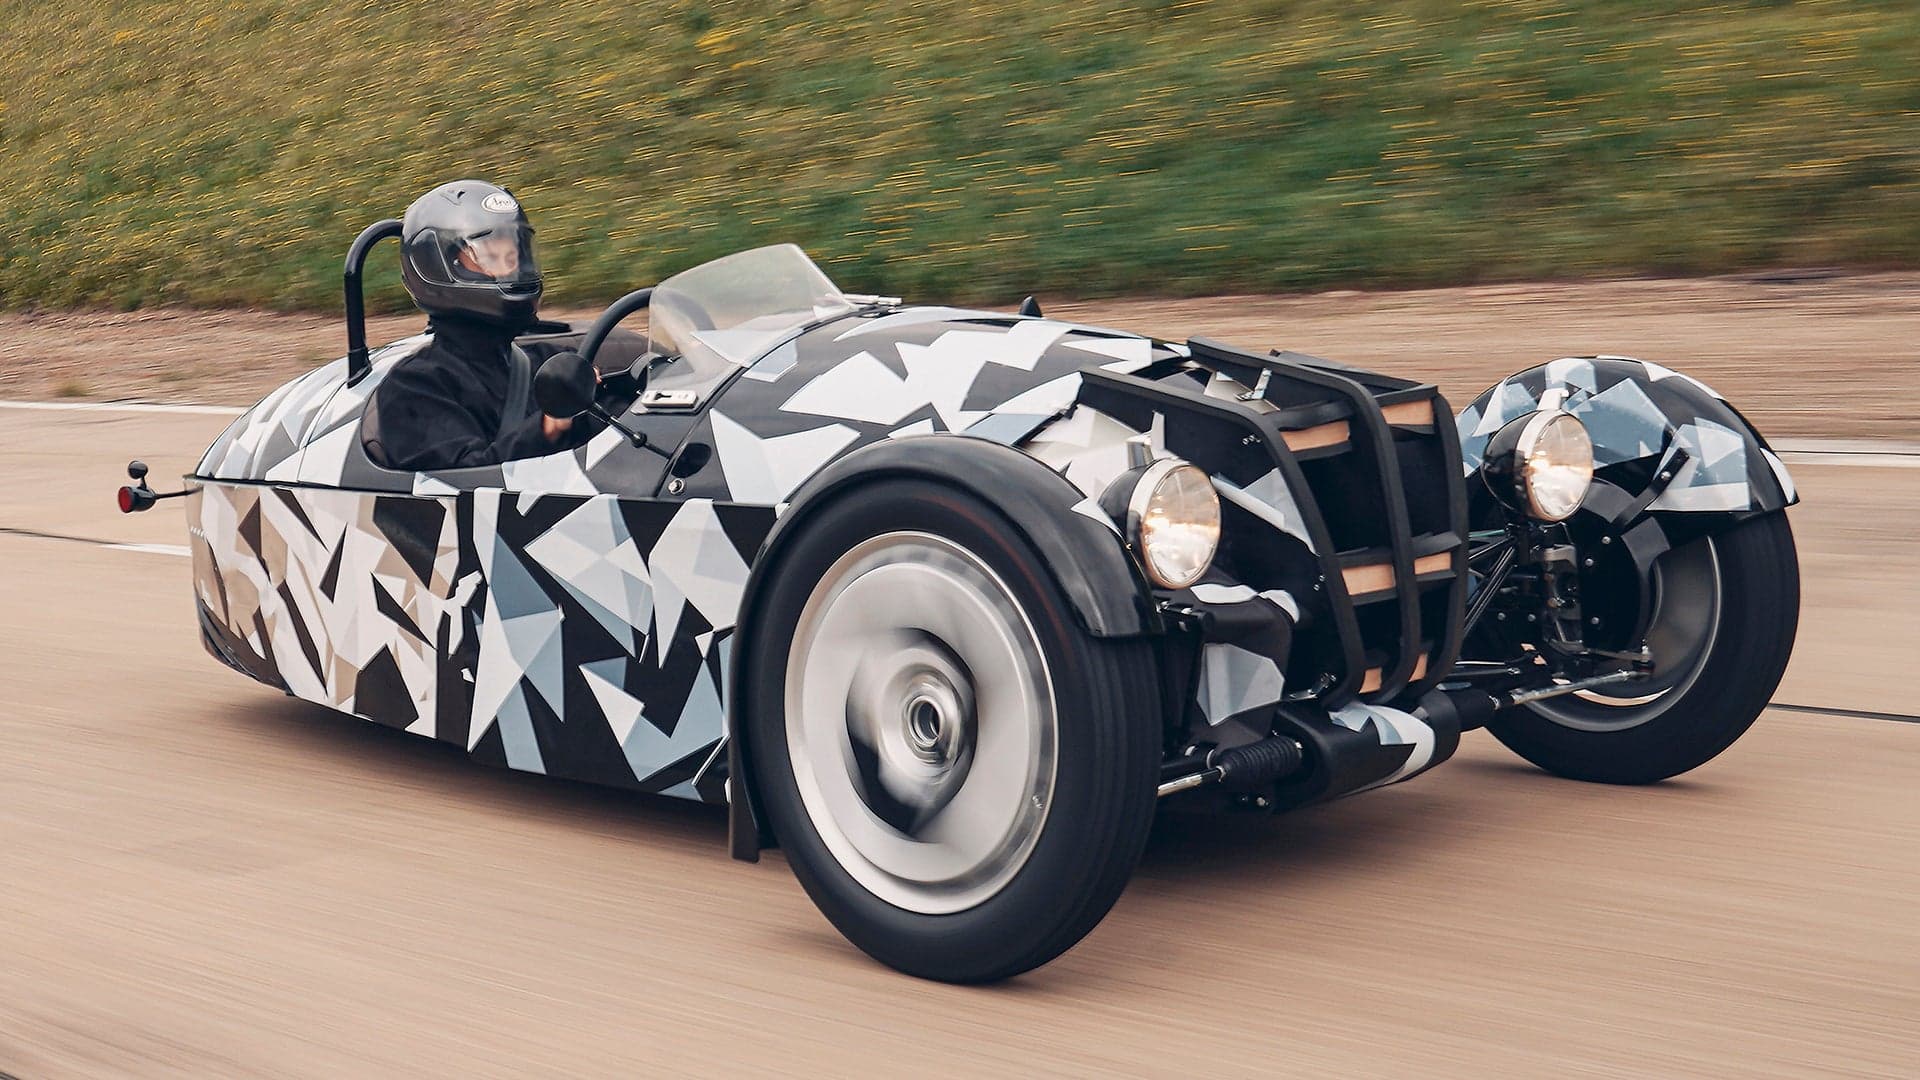 There’s an All-New Morgan Three-Wheeler Coming, Praise Be